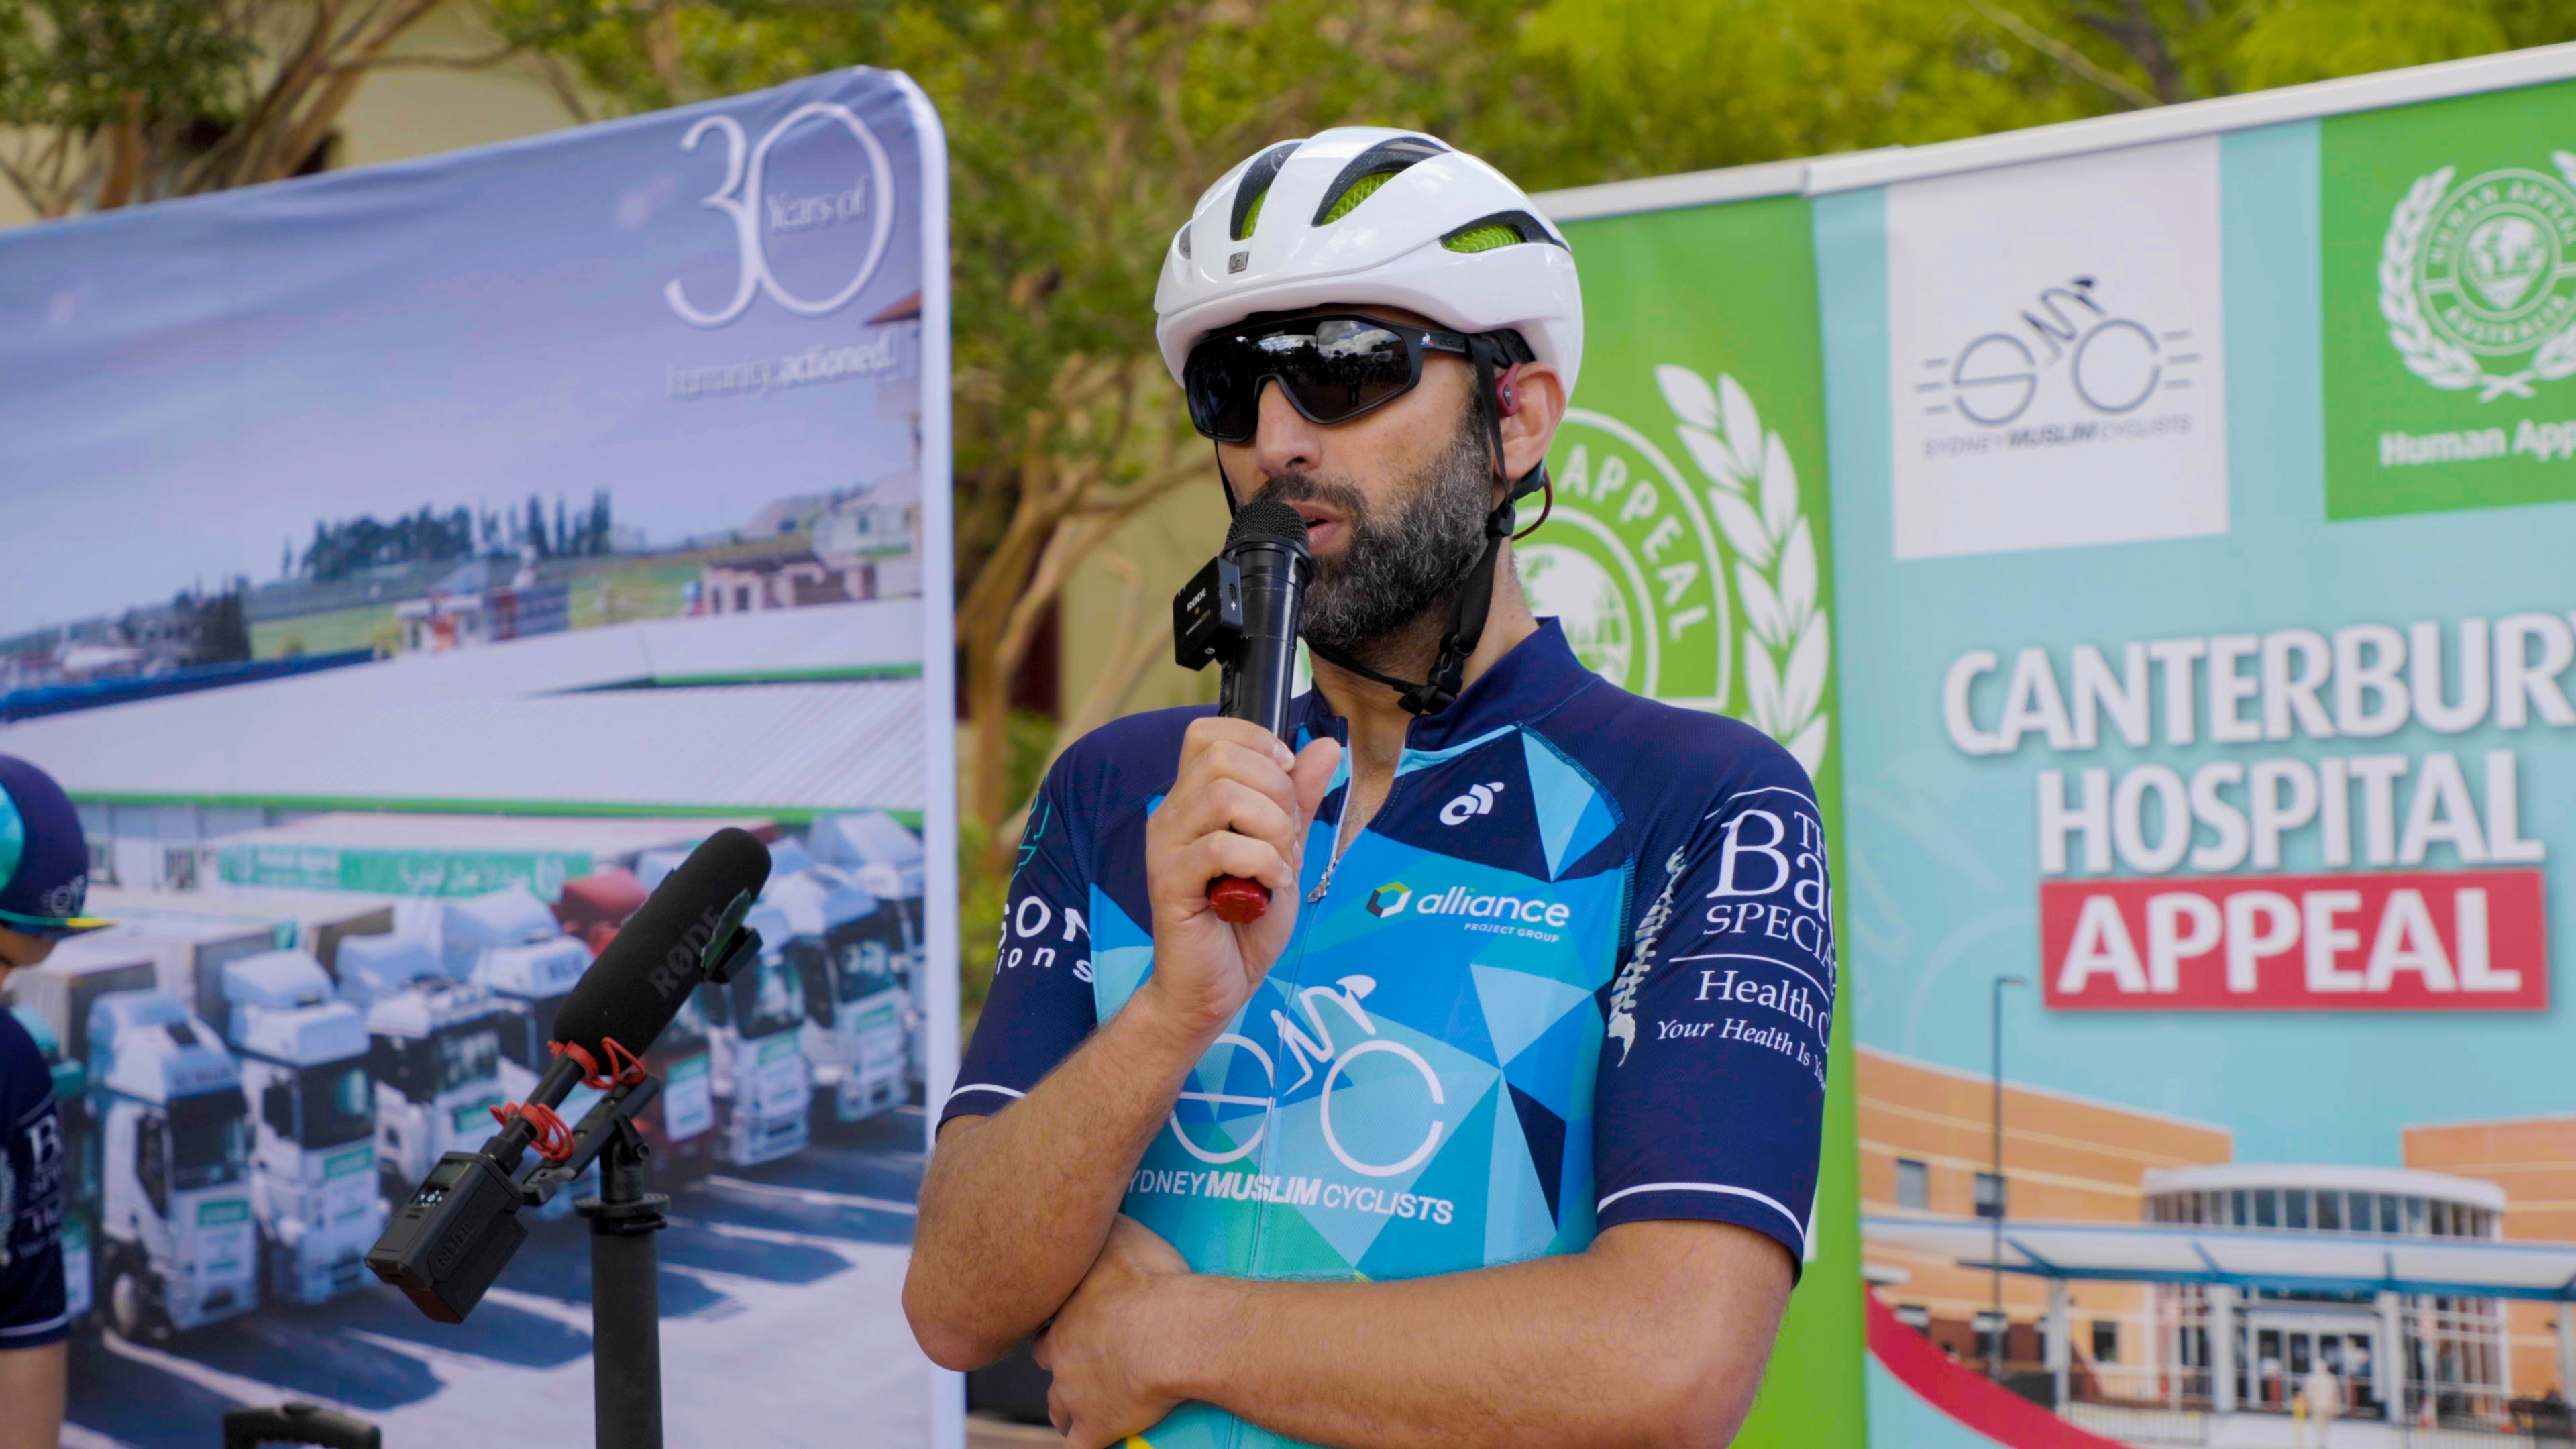 Furat Sultan At Human Appeal Australia & Sydney Muslim Cyclists Fundraising For Canterbury Hospital Event 2022